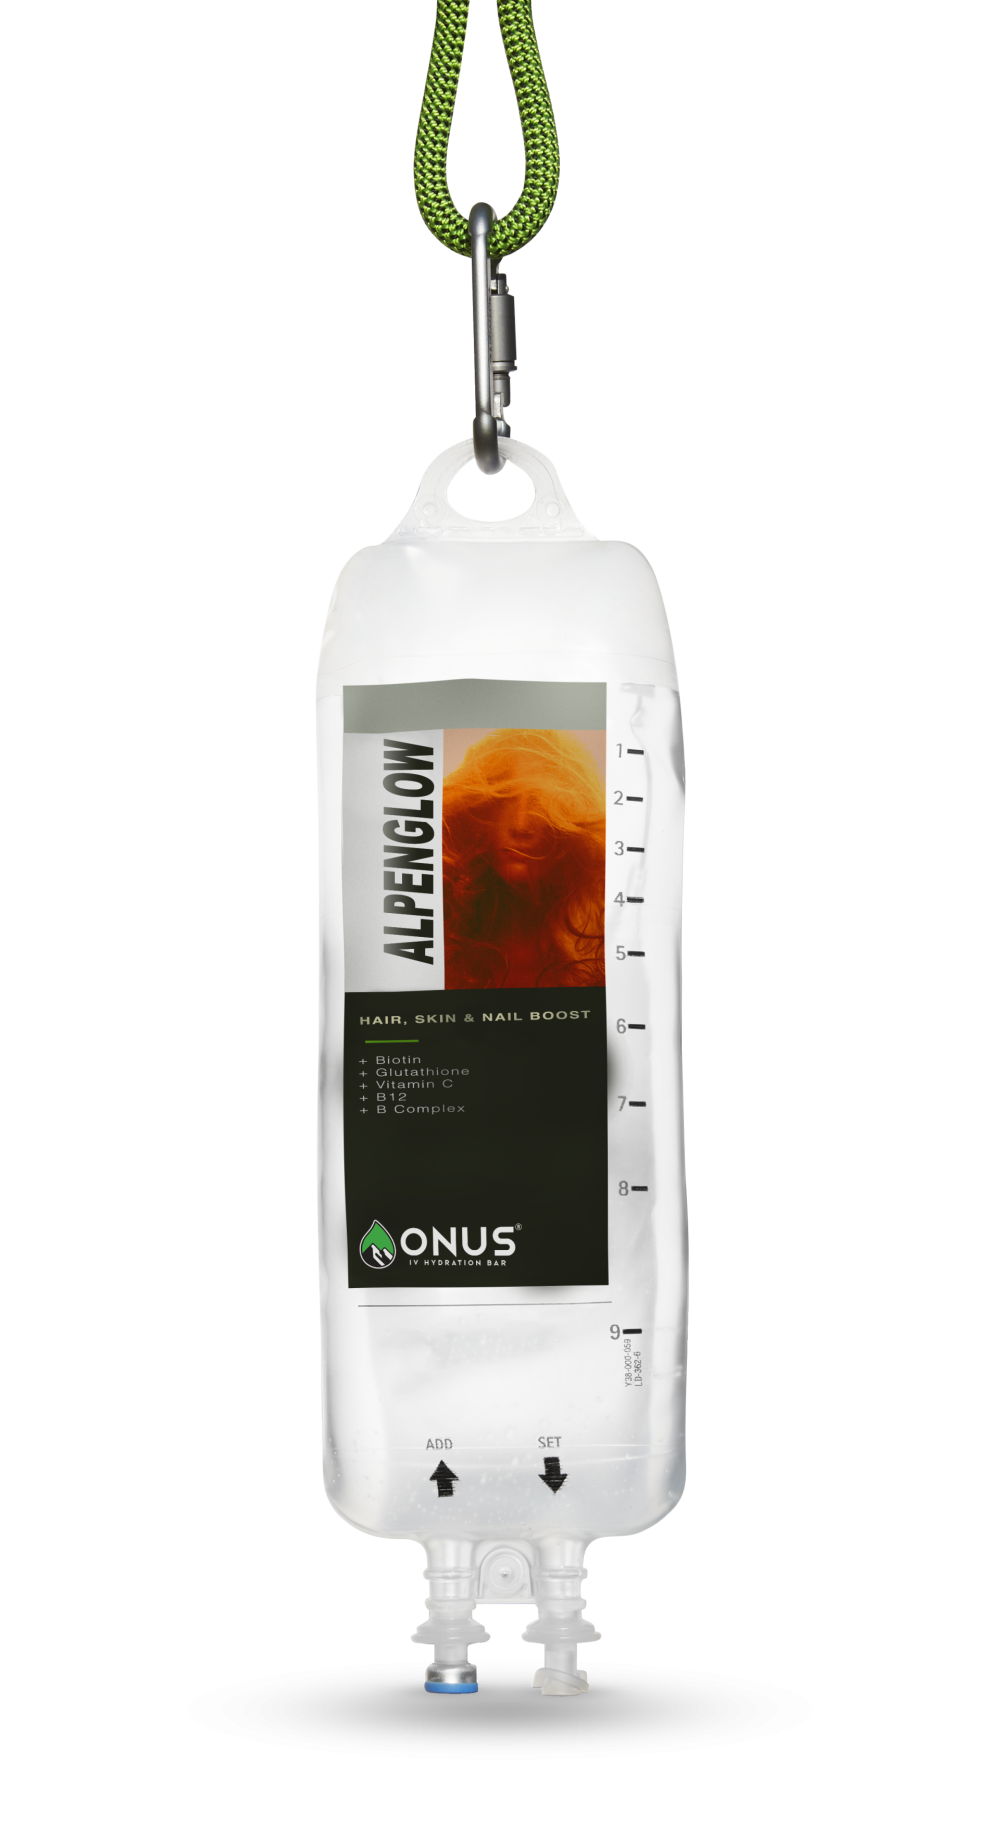 Onus-IV-Bag-Isolated-Alpenglow_copy.png feature image